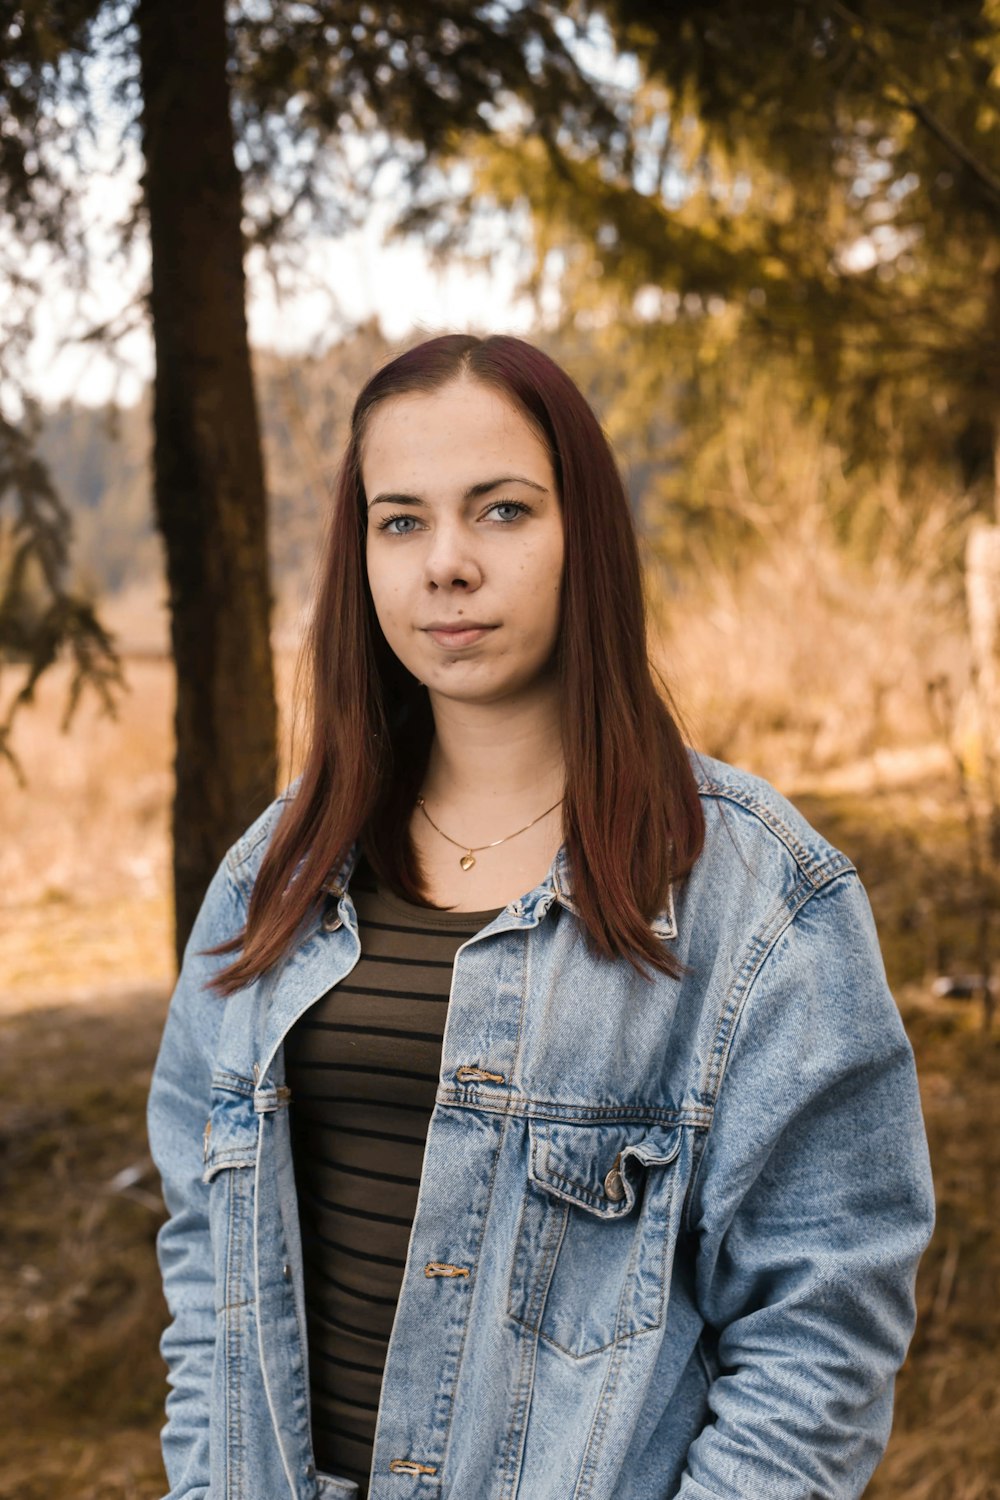 woman in blue denim jacket standing near brown trees during daytime